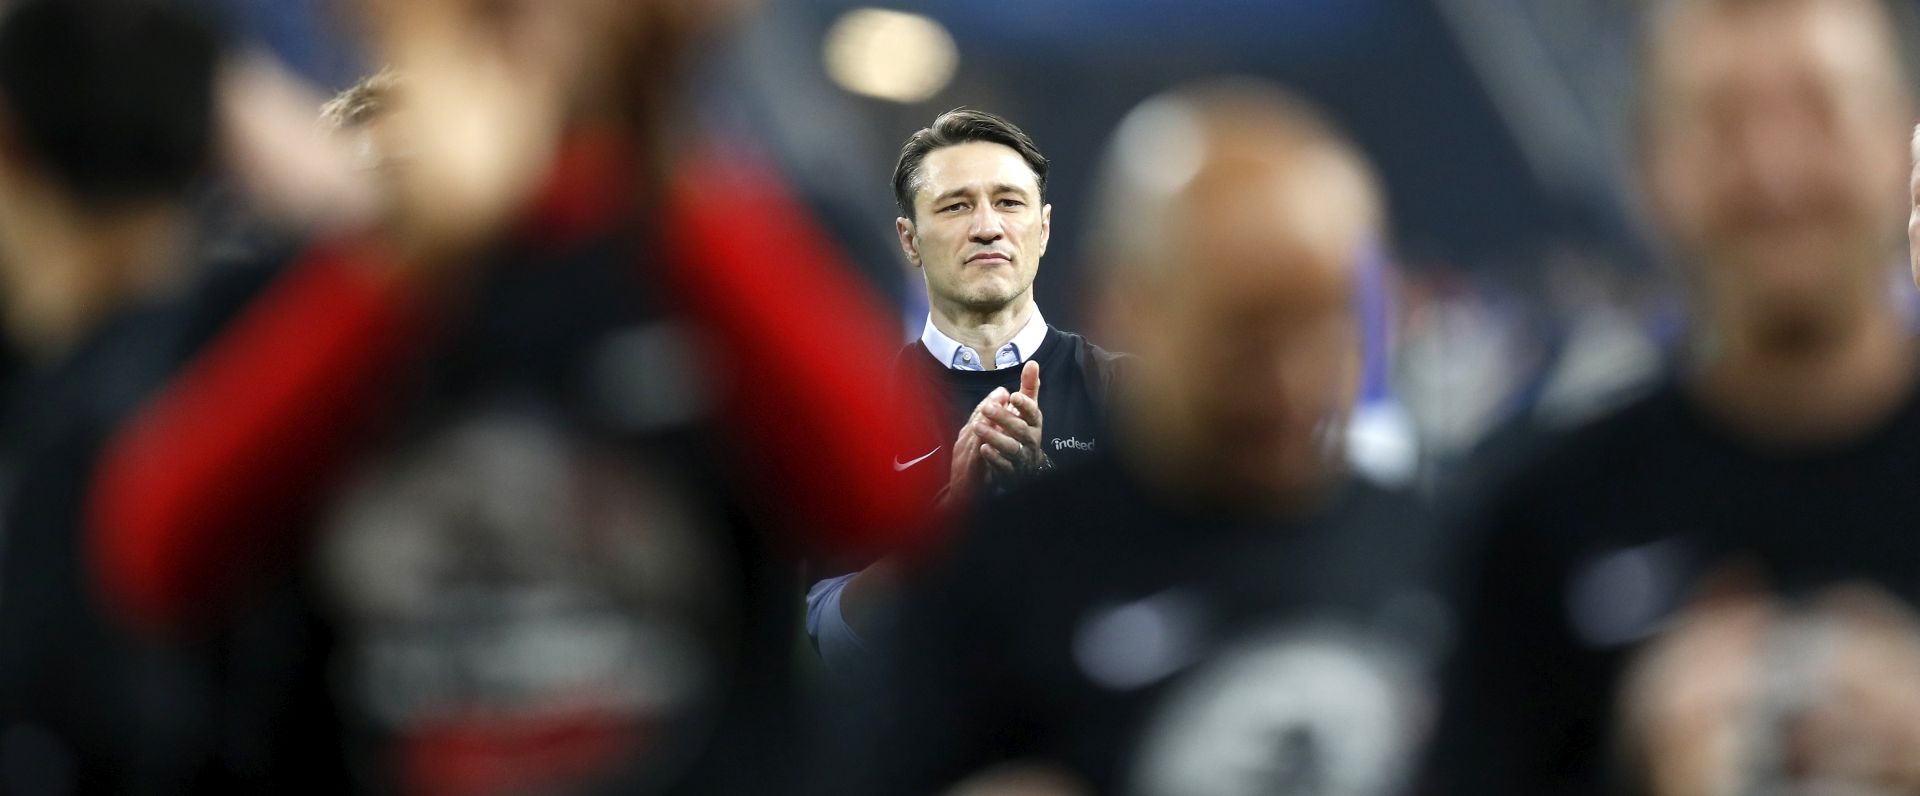 epa06678269 Frankfurt's head coach Niko Kovac celebrates after winning the German DFB Cup semi final soccer match between FC Schalke 04 and Eintracht Frankfurt in Gelsenkirchen, Germany, 18 April 2018. (ATTENTION: The DFB prohibits the utilisation and publication of sequential pictures on the internet and other online media during the match (including half-time). ATTENTION: BLOCKING PERIOD! The DFB permits the further utilisation and publication of the pictures for mobile services (especially MMS) and for DVB-H and DMB only after the end of the match.  EPA/FRIEDEMANN VOGEL